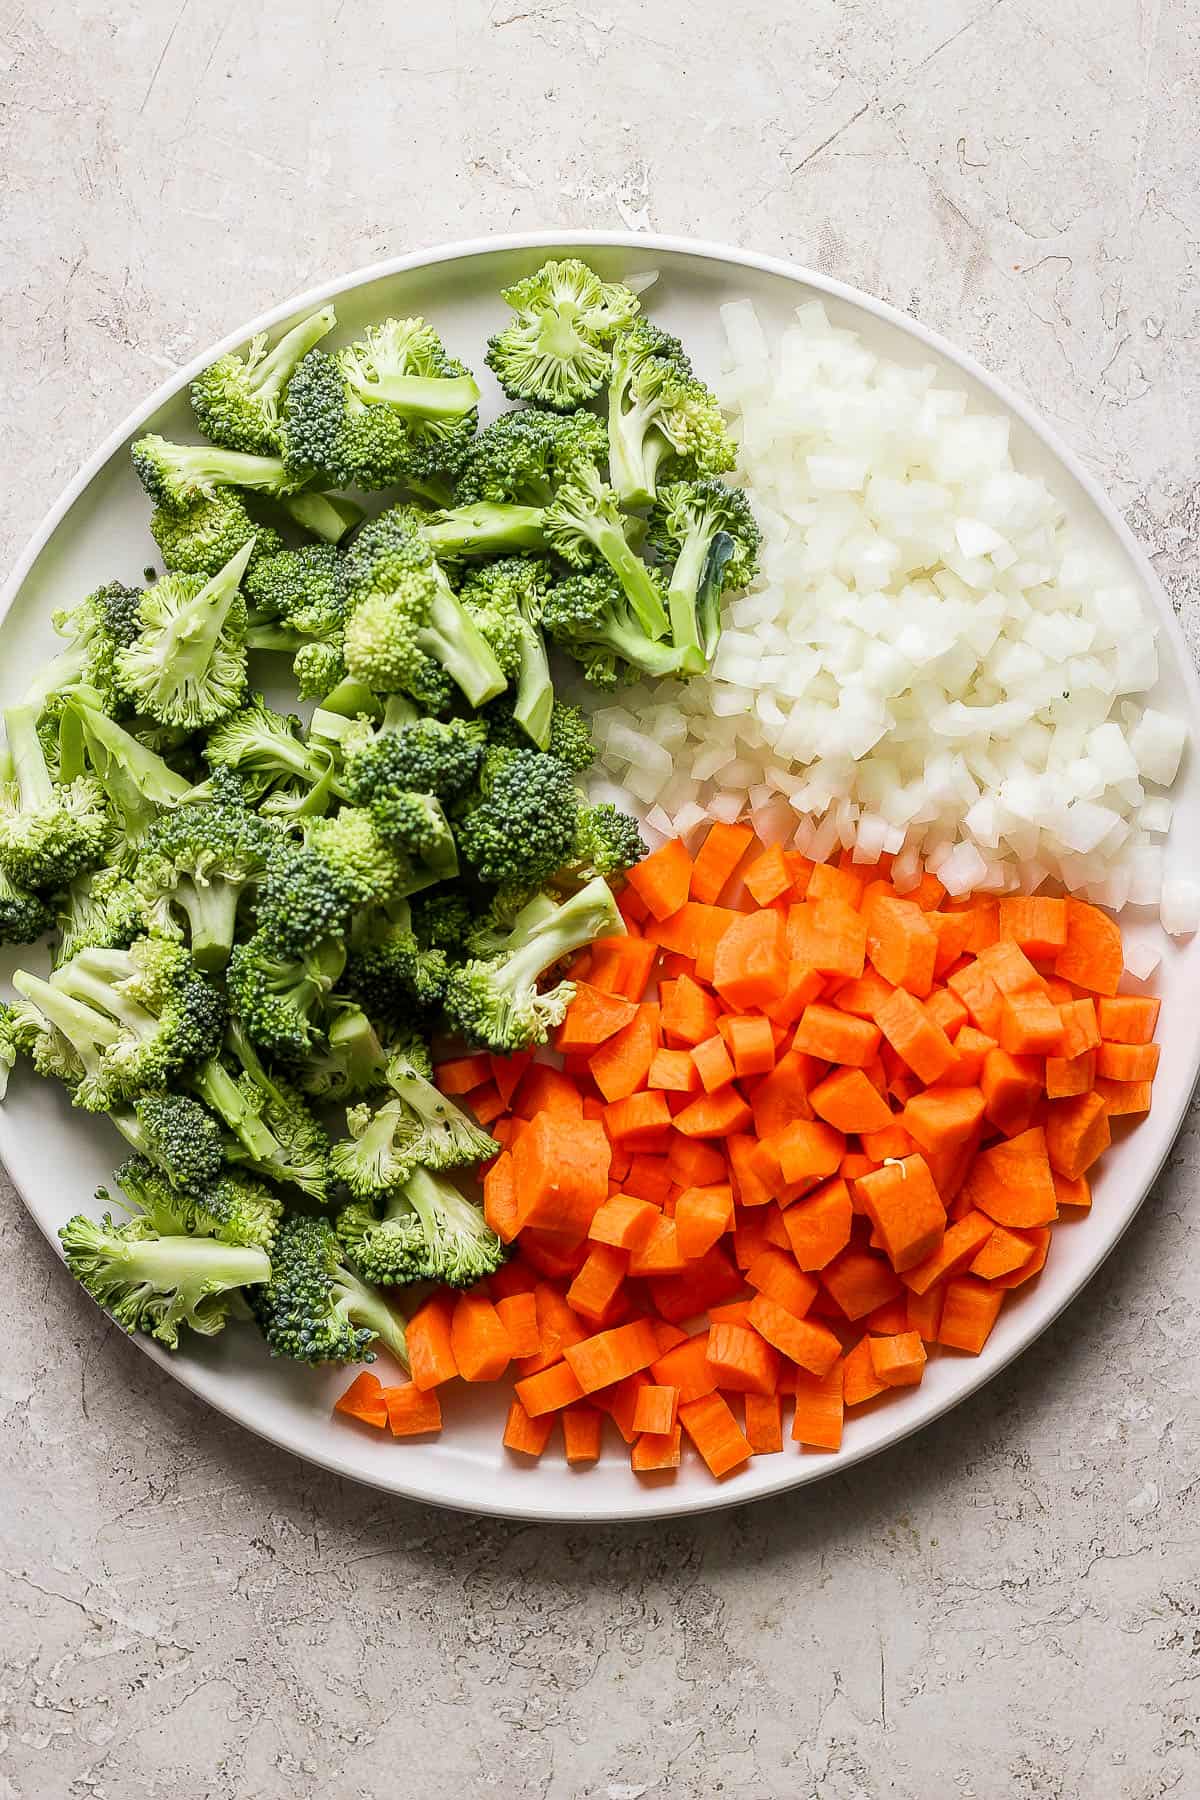 Chopped onion, carrots, and broccoli florets on a white plate.